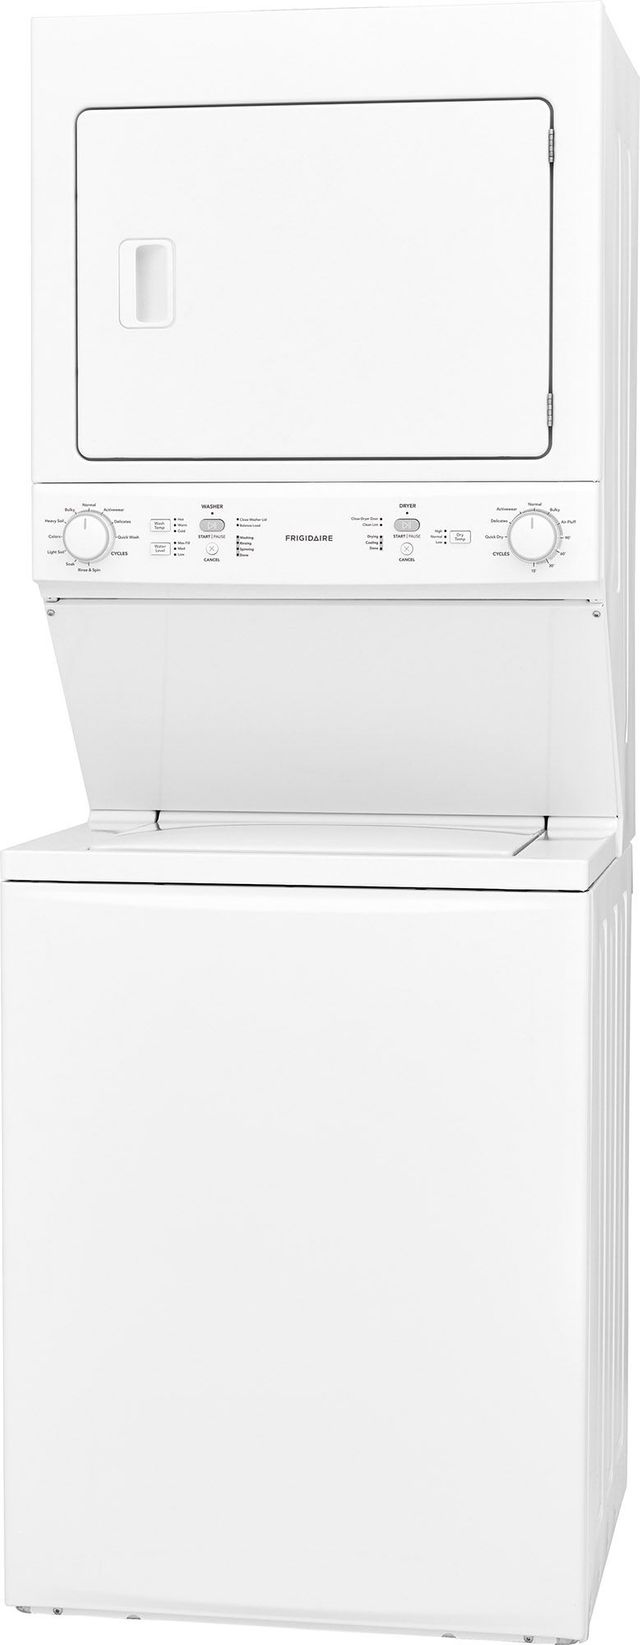 Frigidaire® 3.9 Cu. Ft. Washer, 5.5 Cu. Ft. Dryer White Stack Laundry Center 7